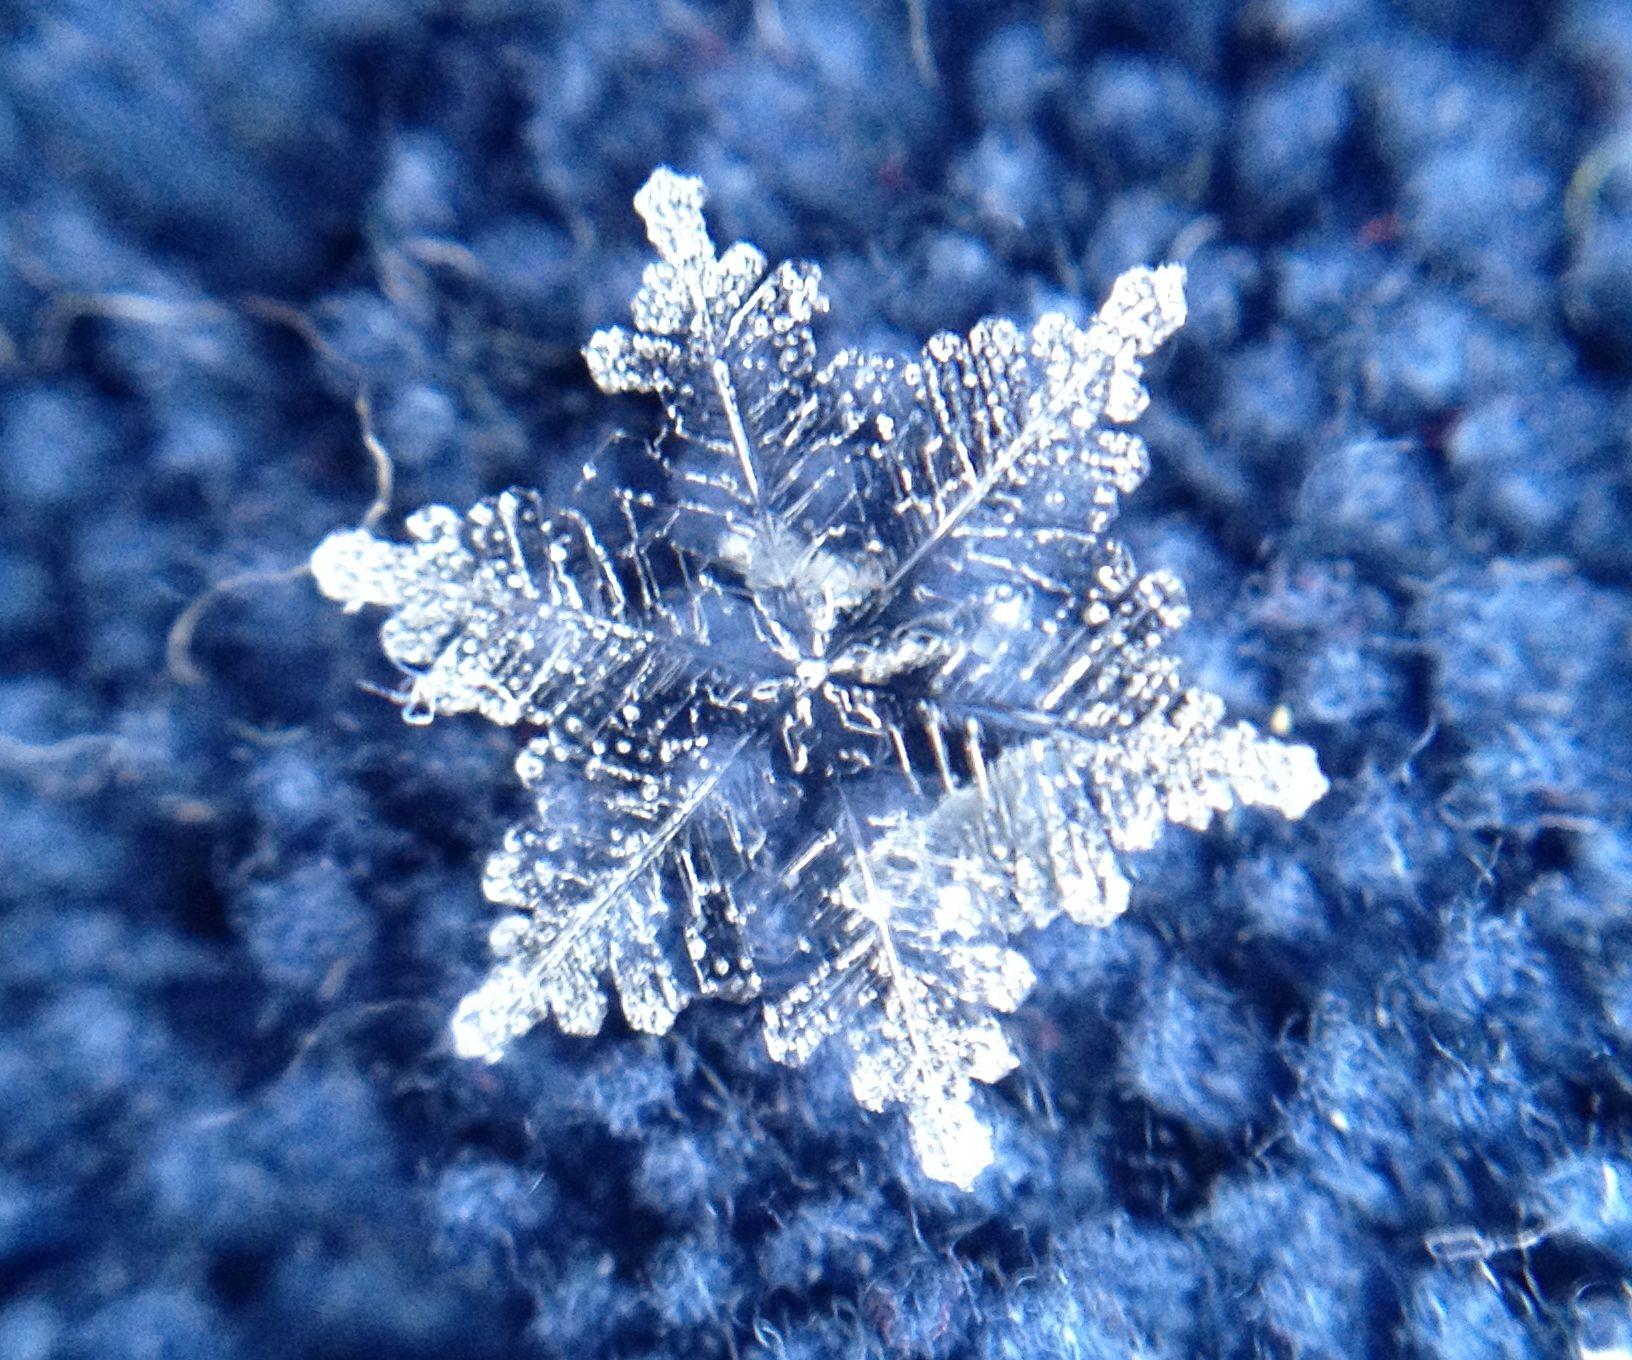 Macro iPhone image of snowflakes from a Midwest snowstorm. Snowflake image, Snowflake photography, Snowflakes real